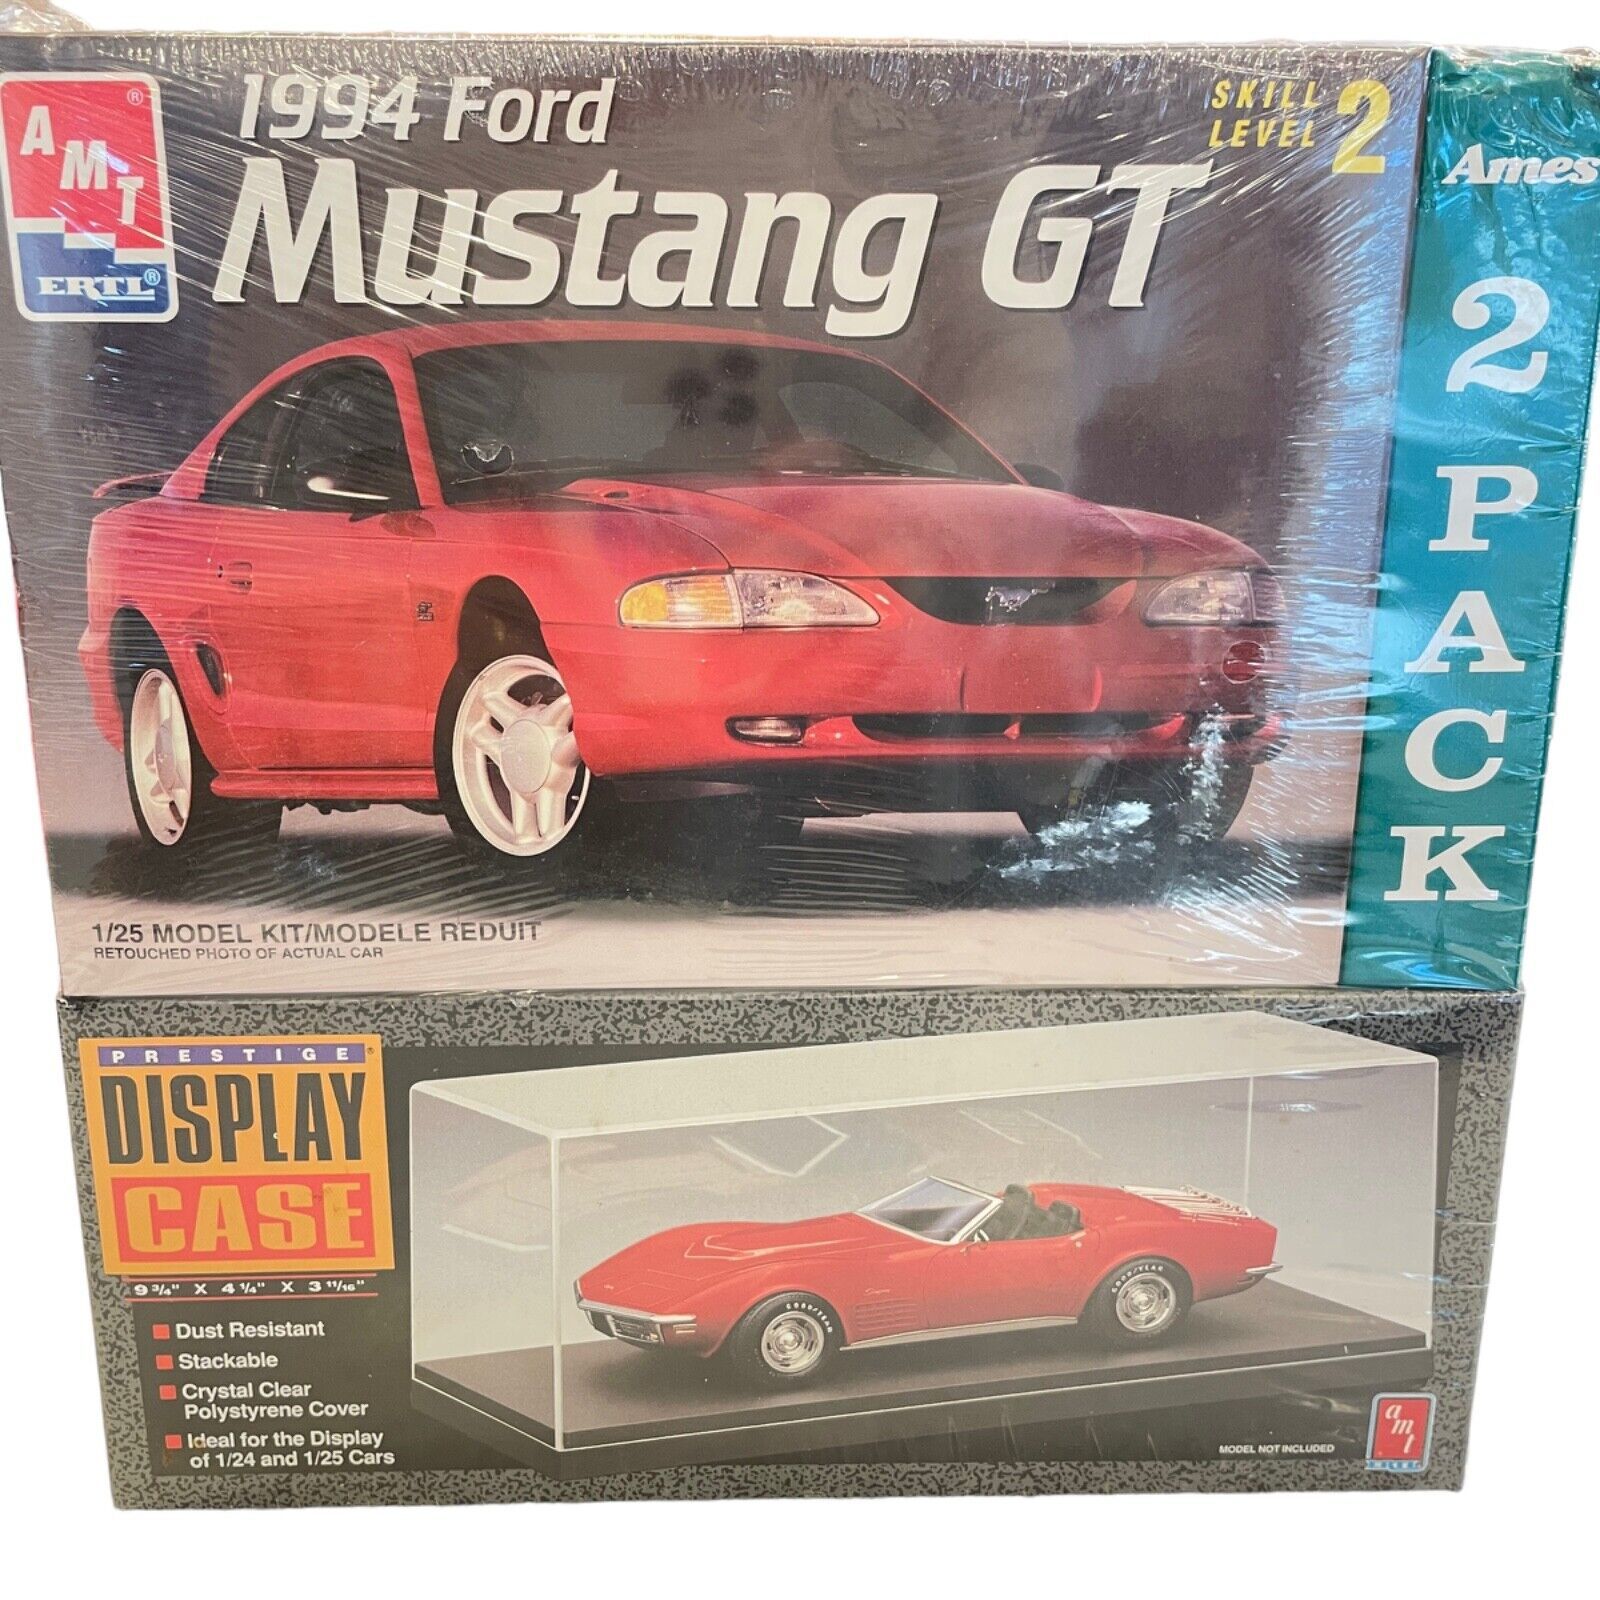 Primary image for Ford Mustang GT 1994 AMT Ertl  Model Car Kit with Bonus Display Case New Sealed